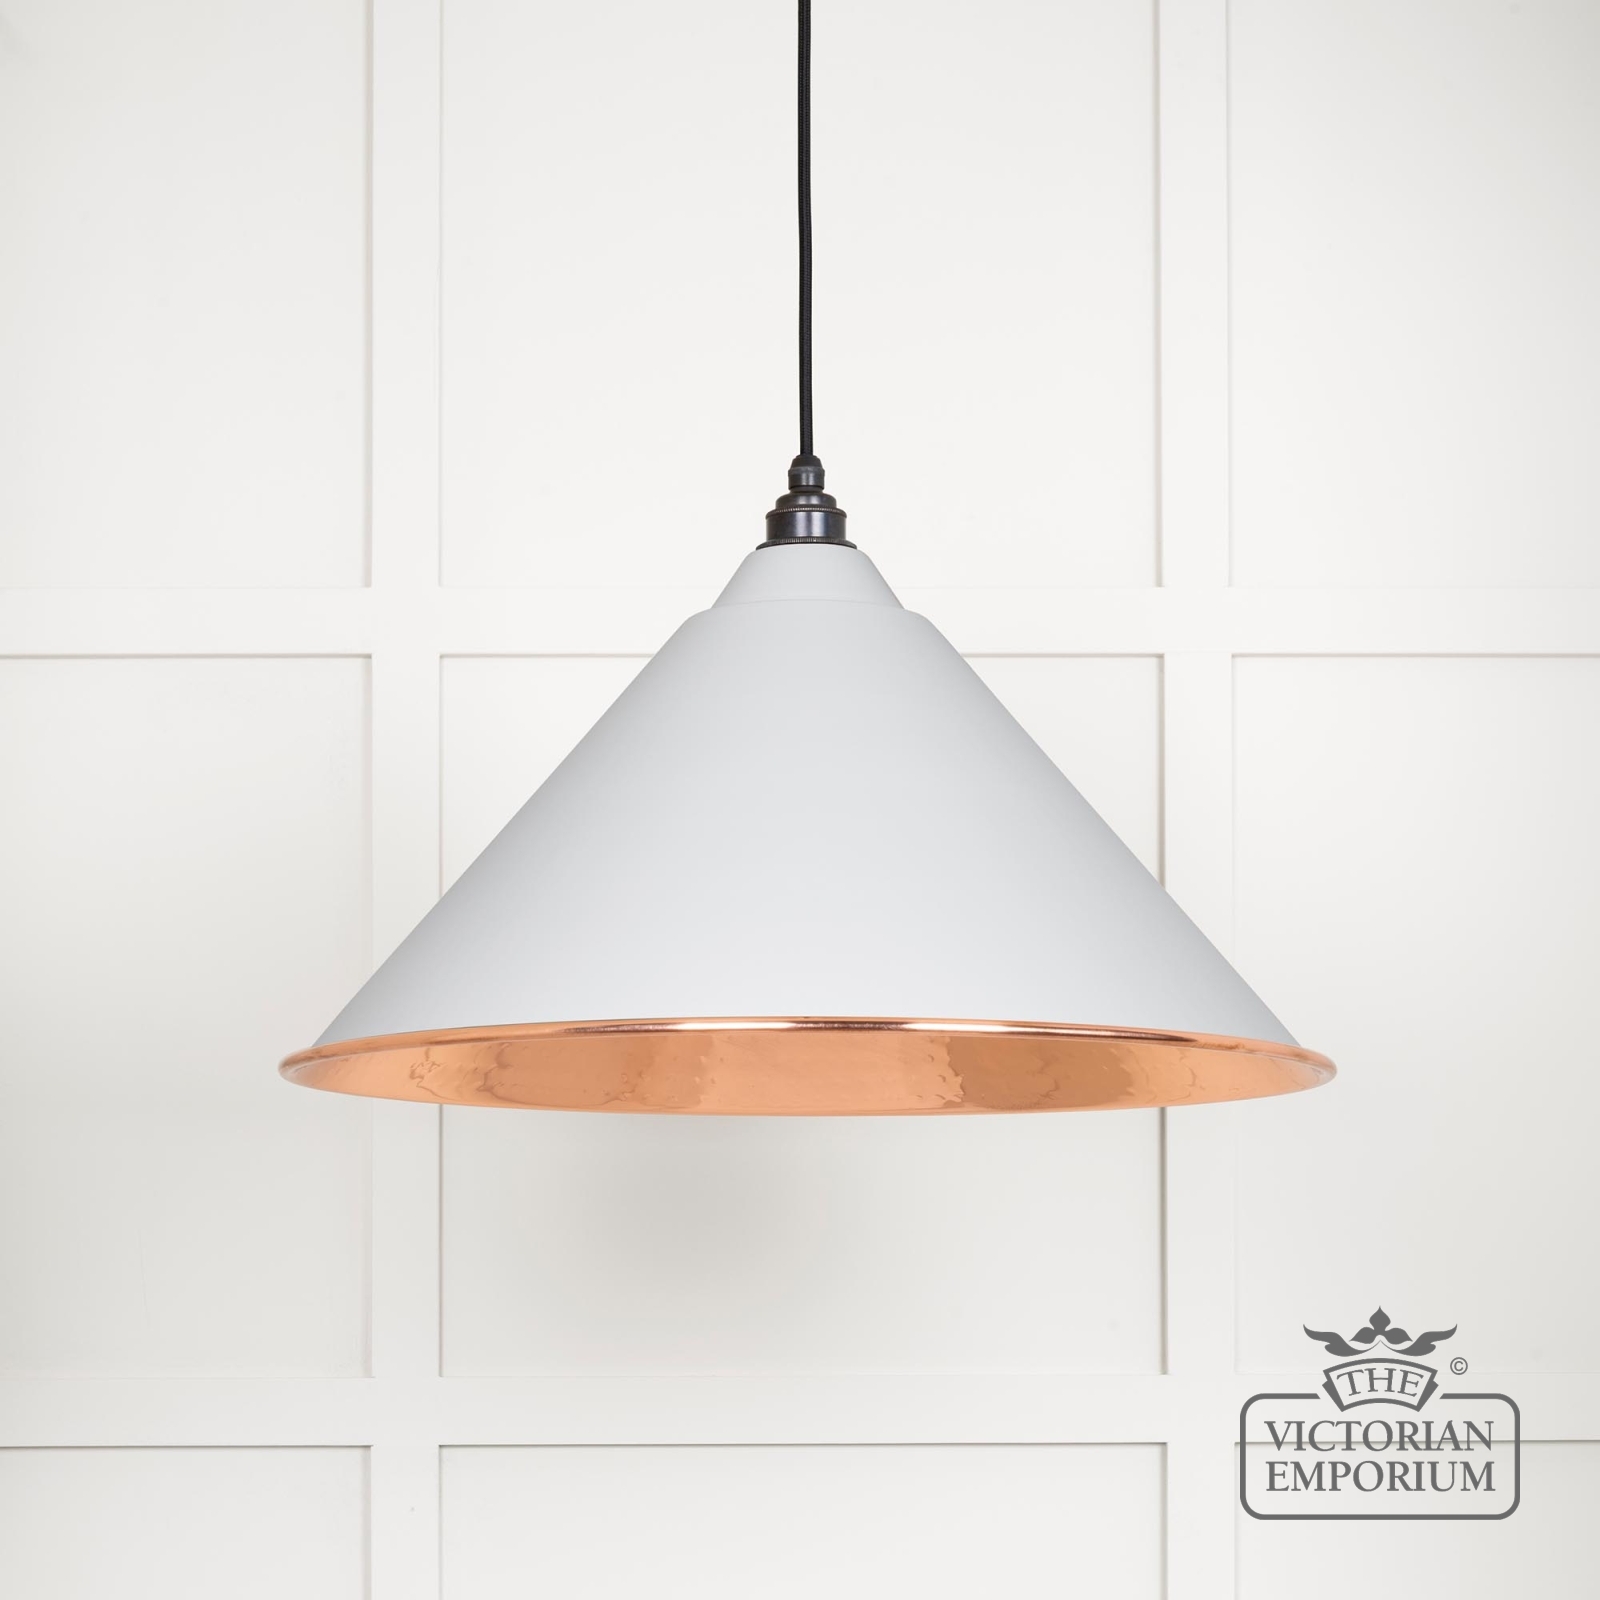 Hockliffe pendant light in Flock and hammered copper